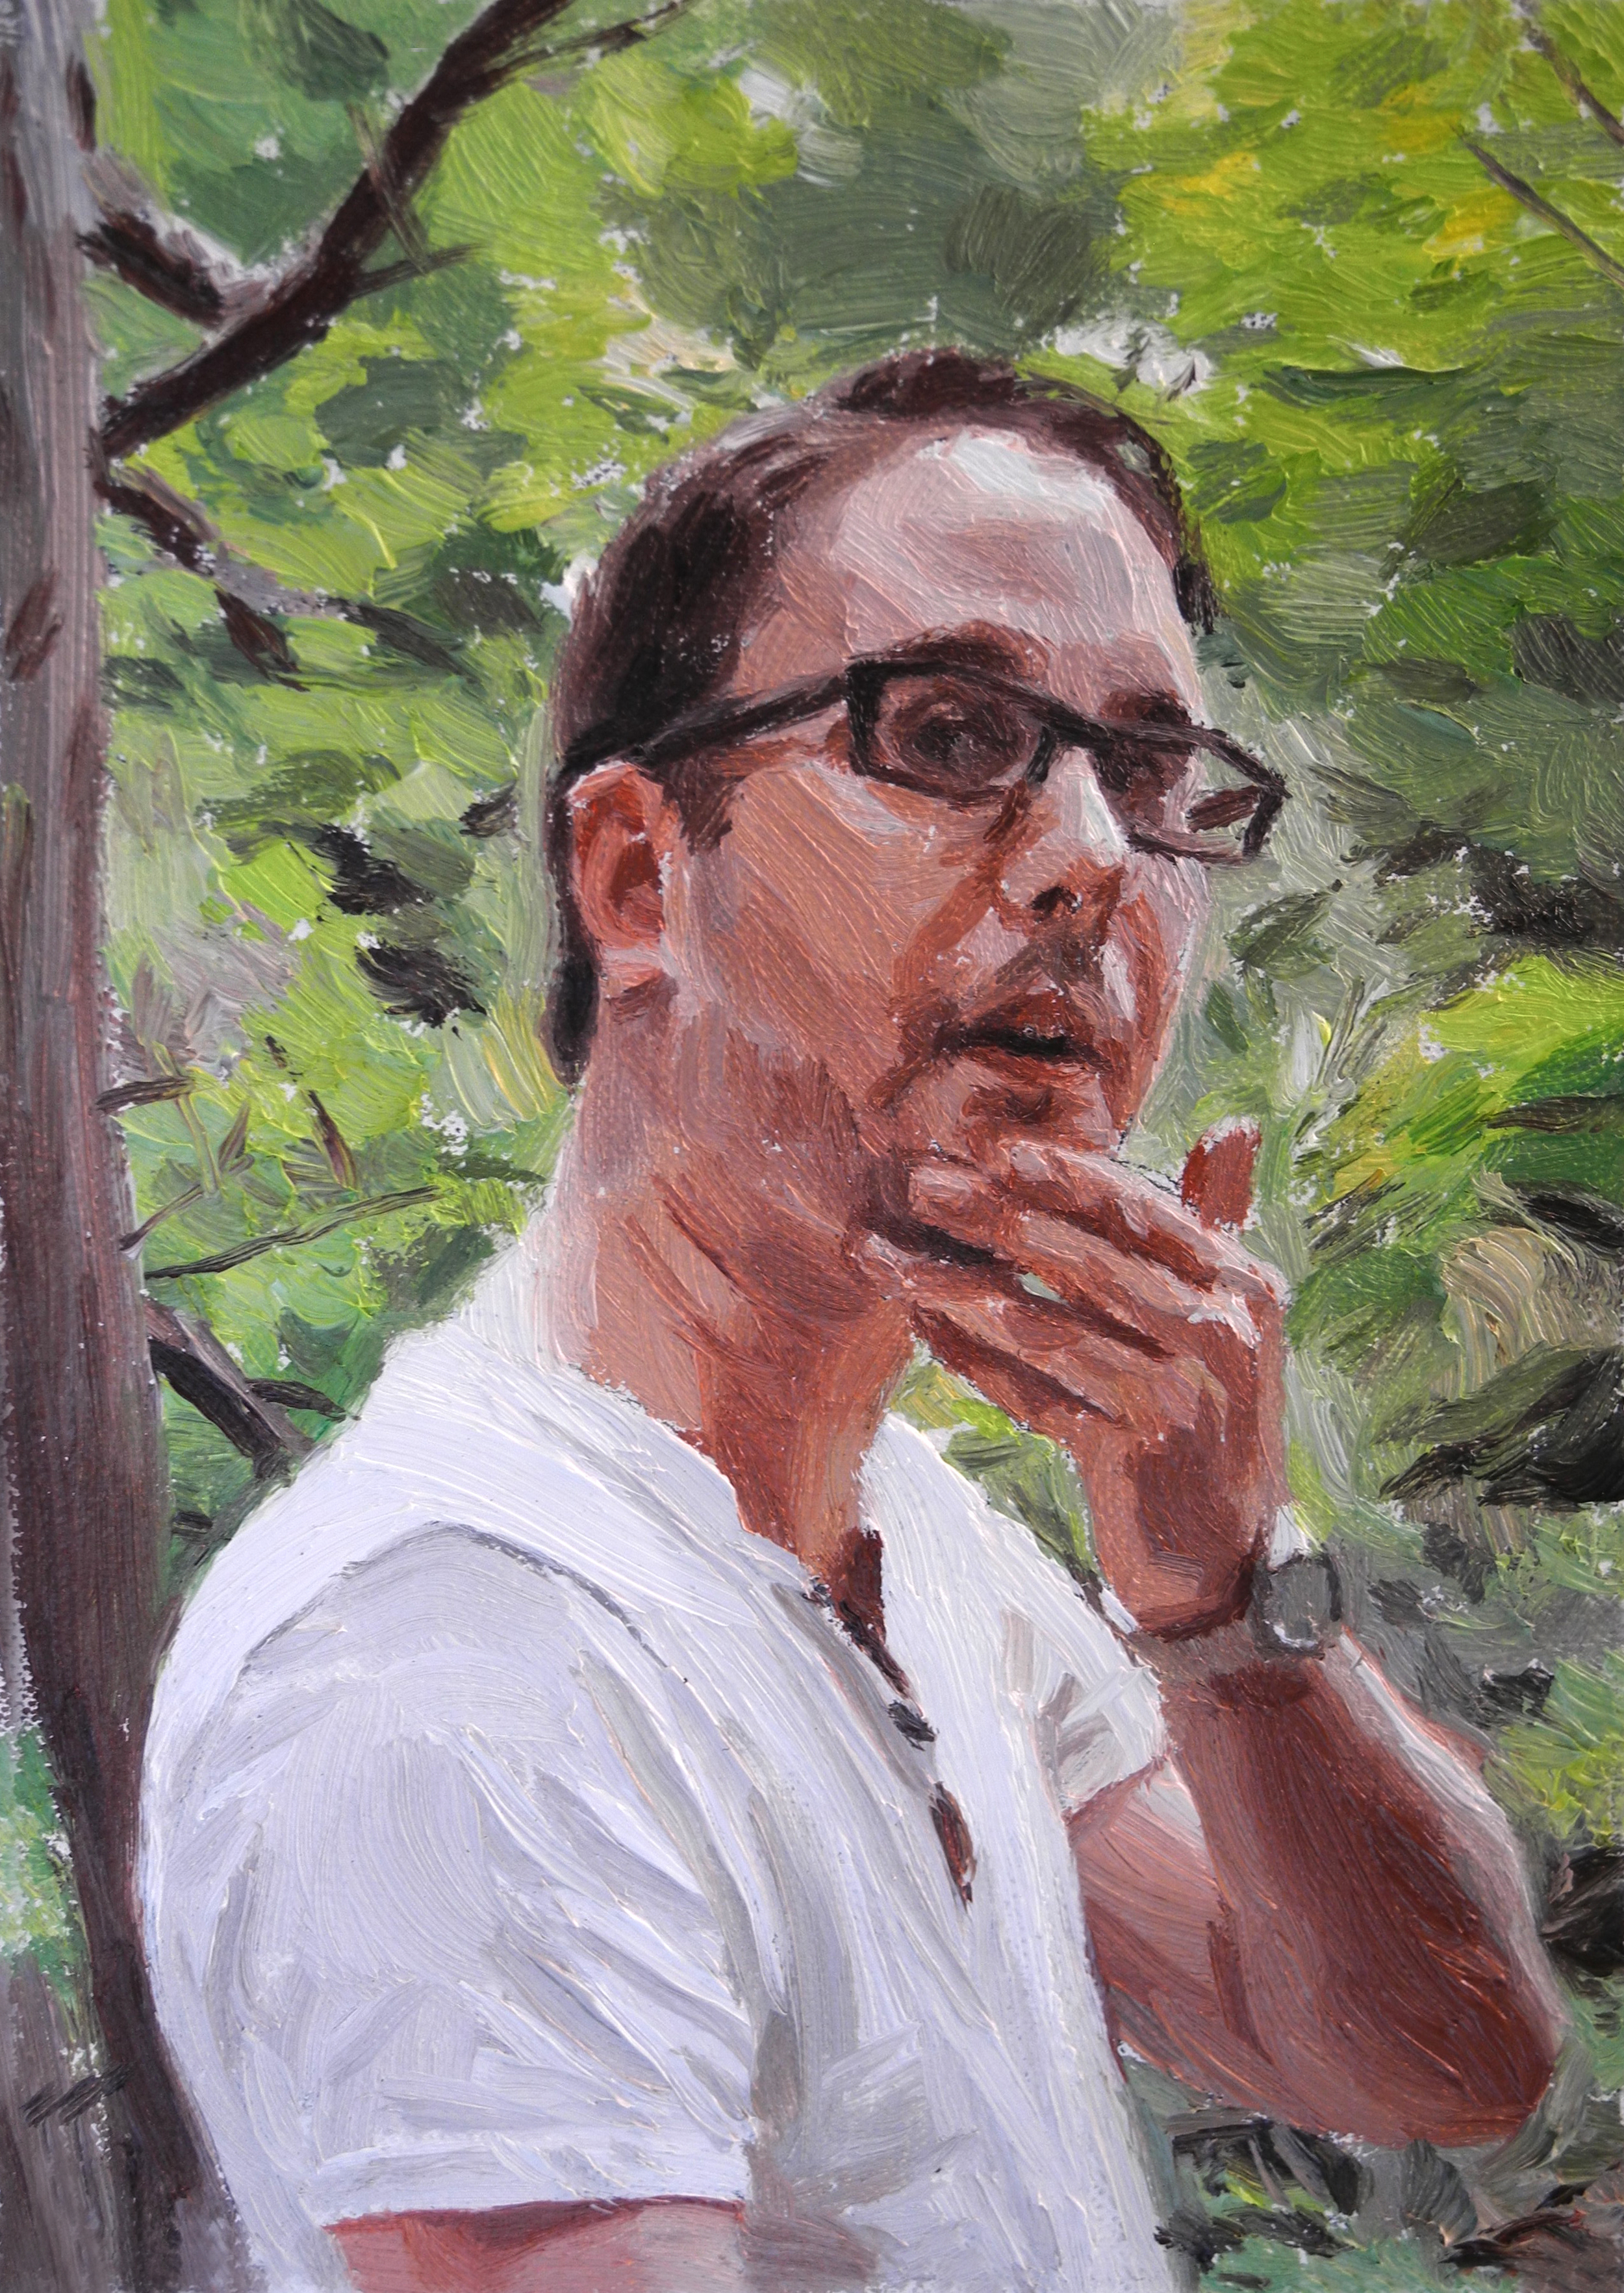 PORTRAIT IN THE WOODS